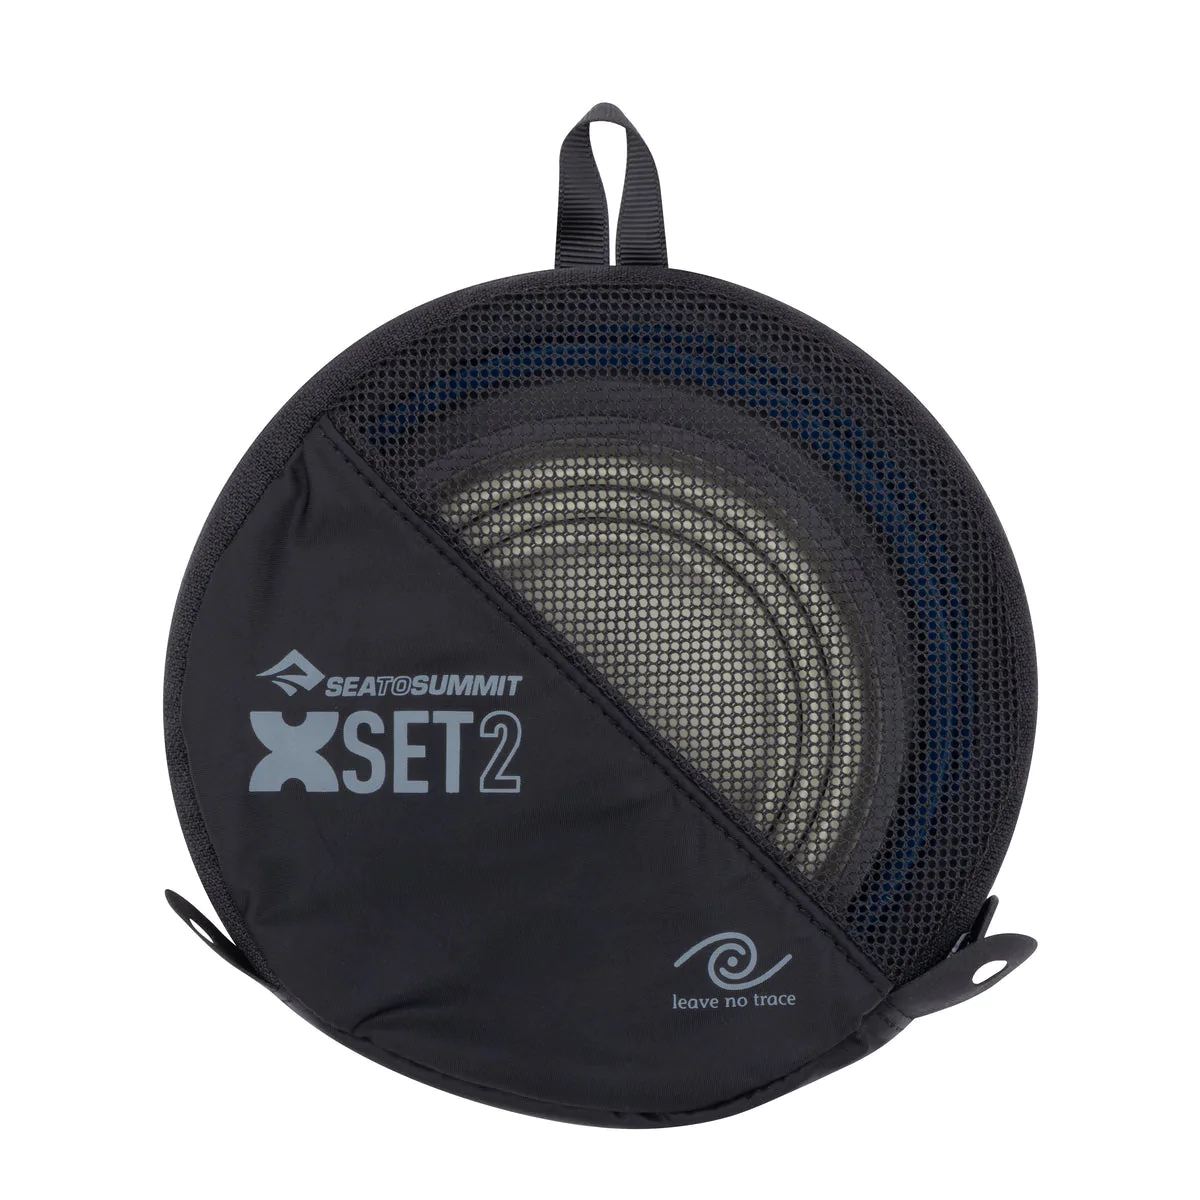 Sea to Summit X-Set 2-Piece Set (Plate & Cup)